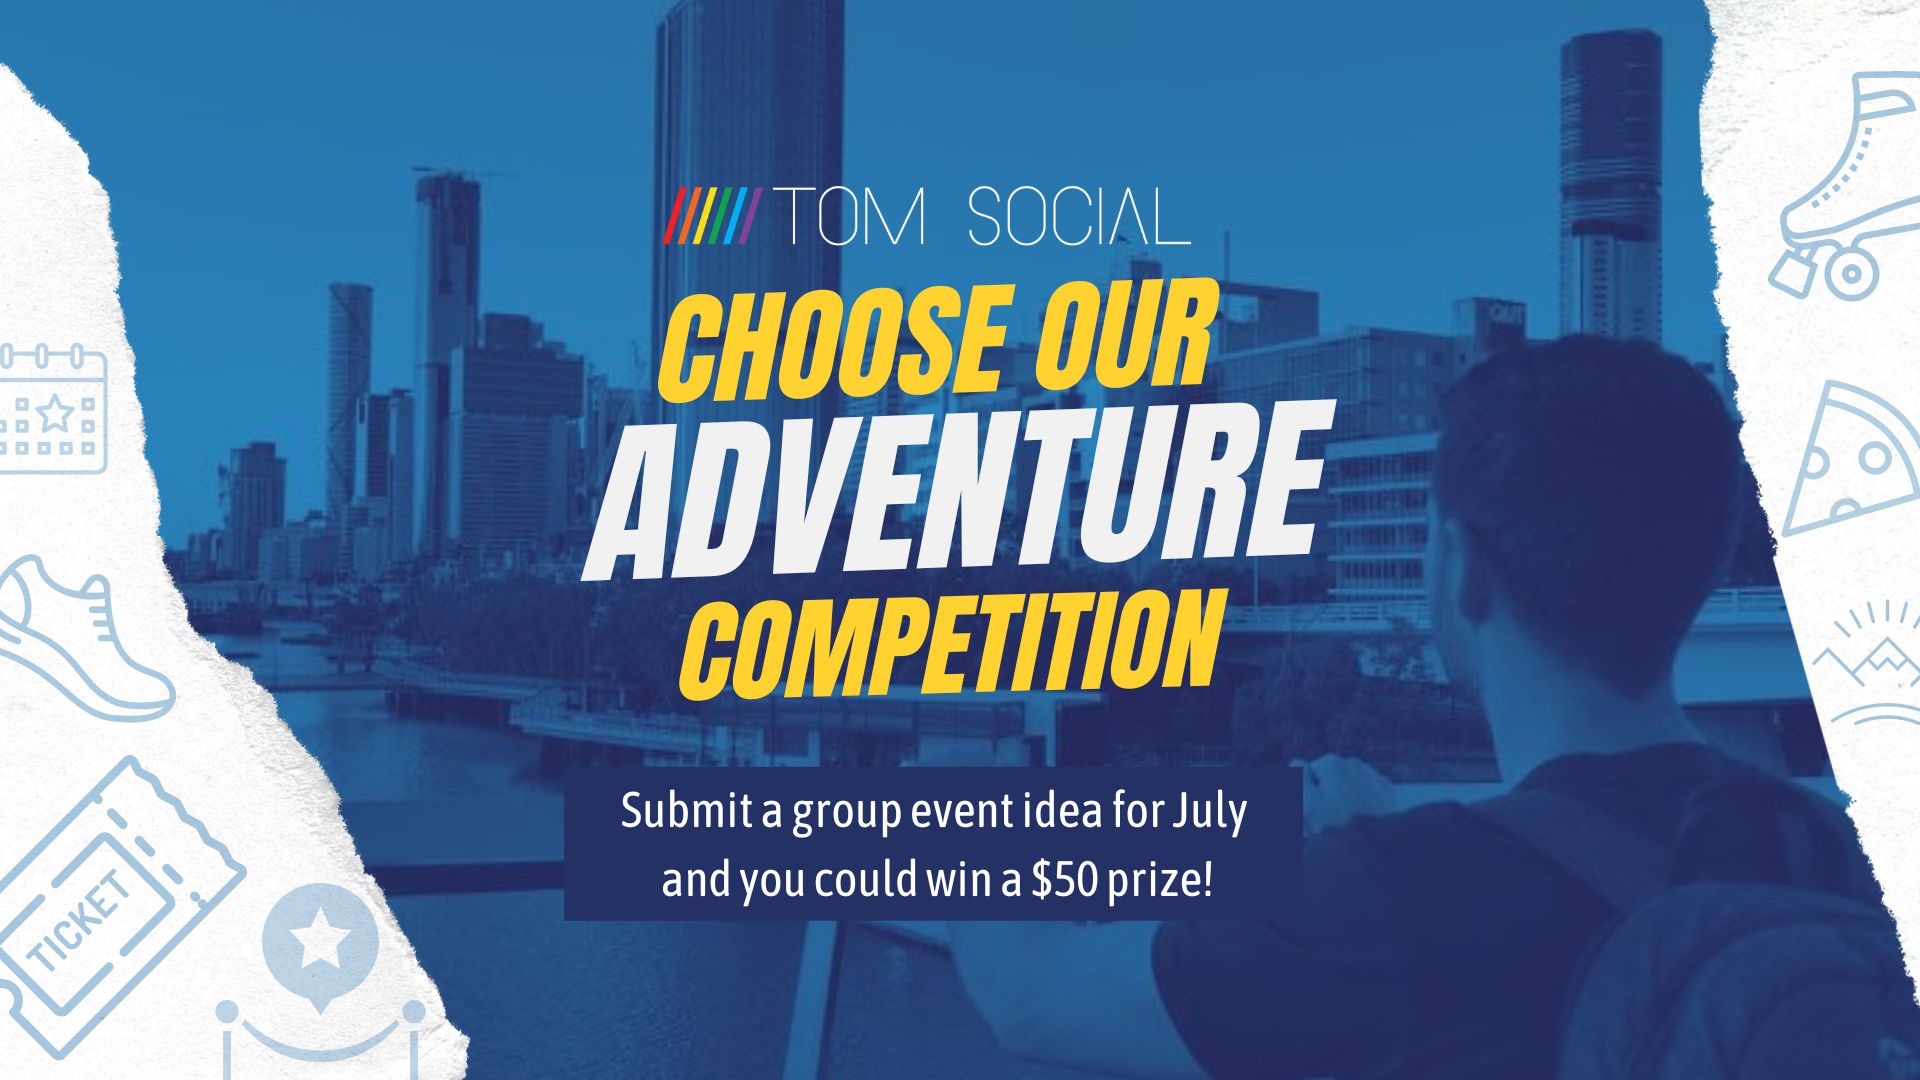 Choose our adventure competition